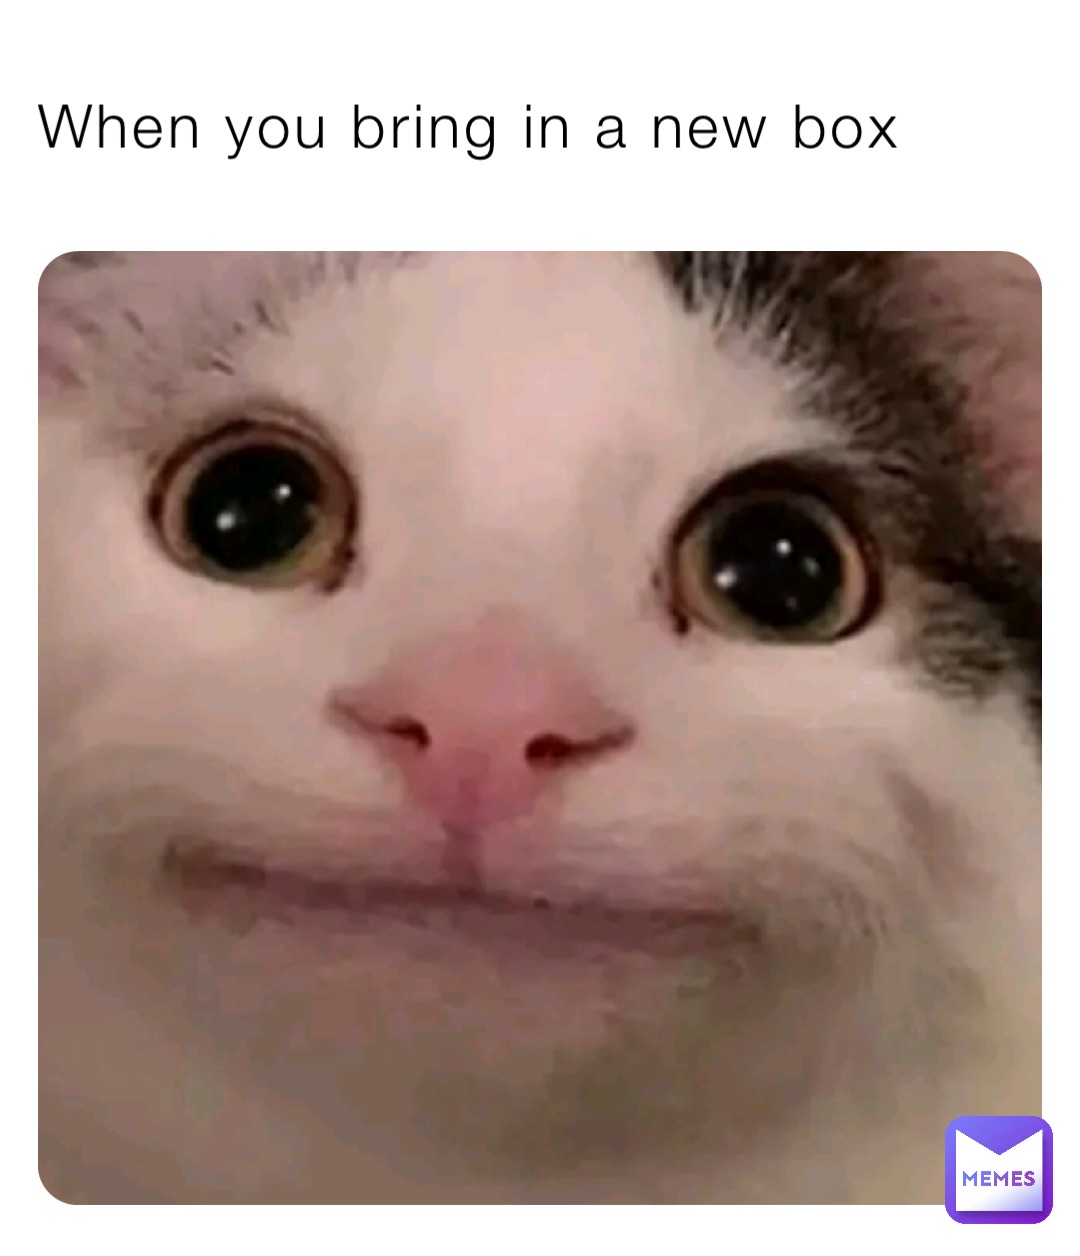 When you bring in a new box